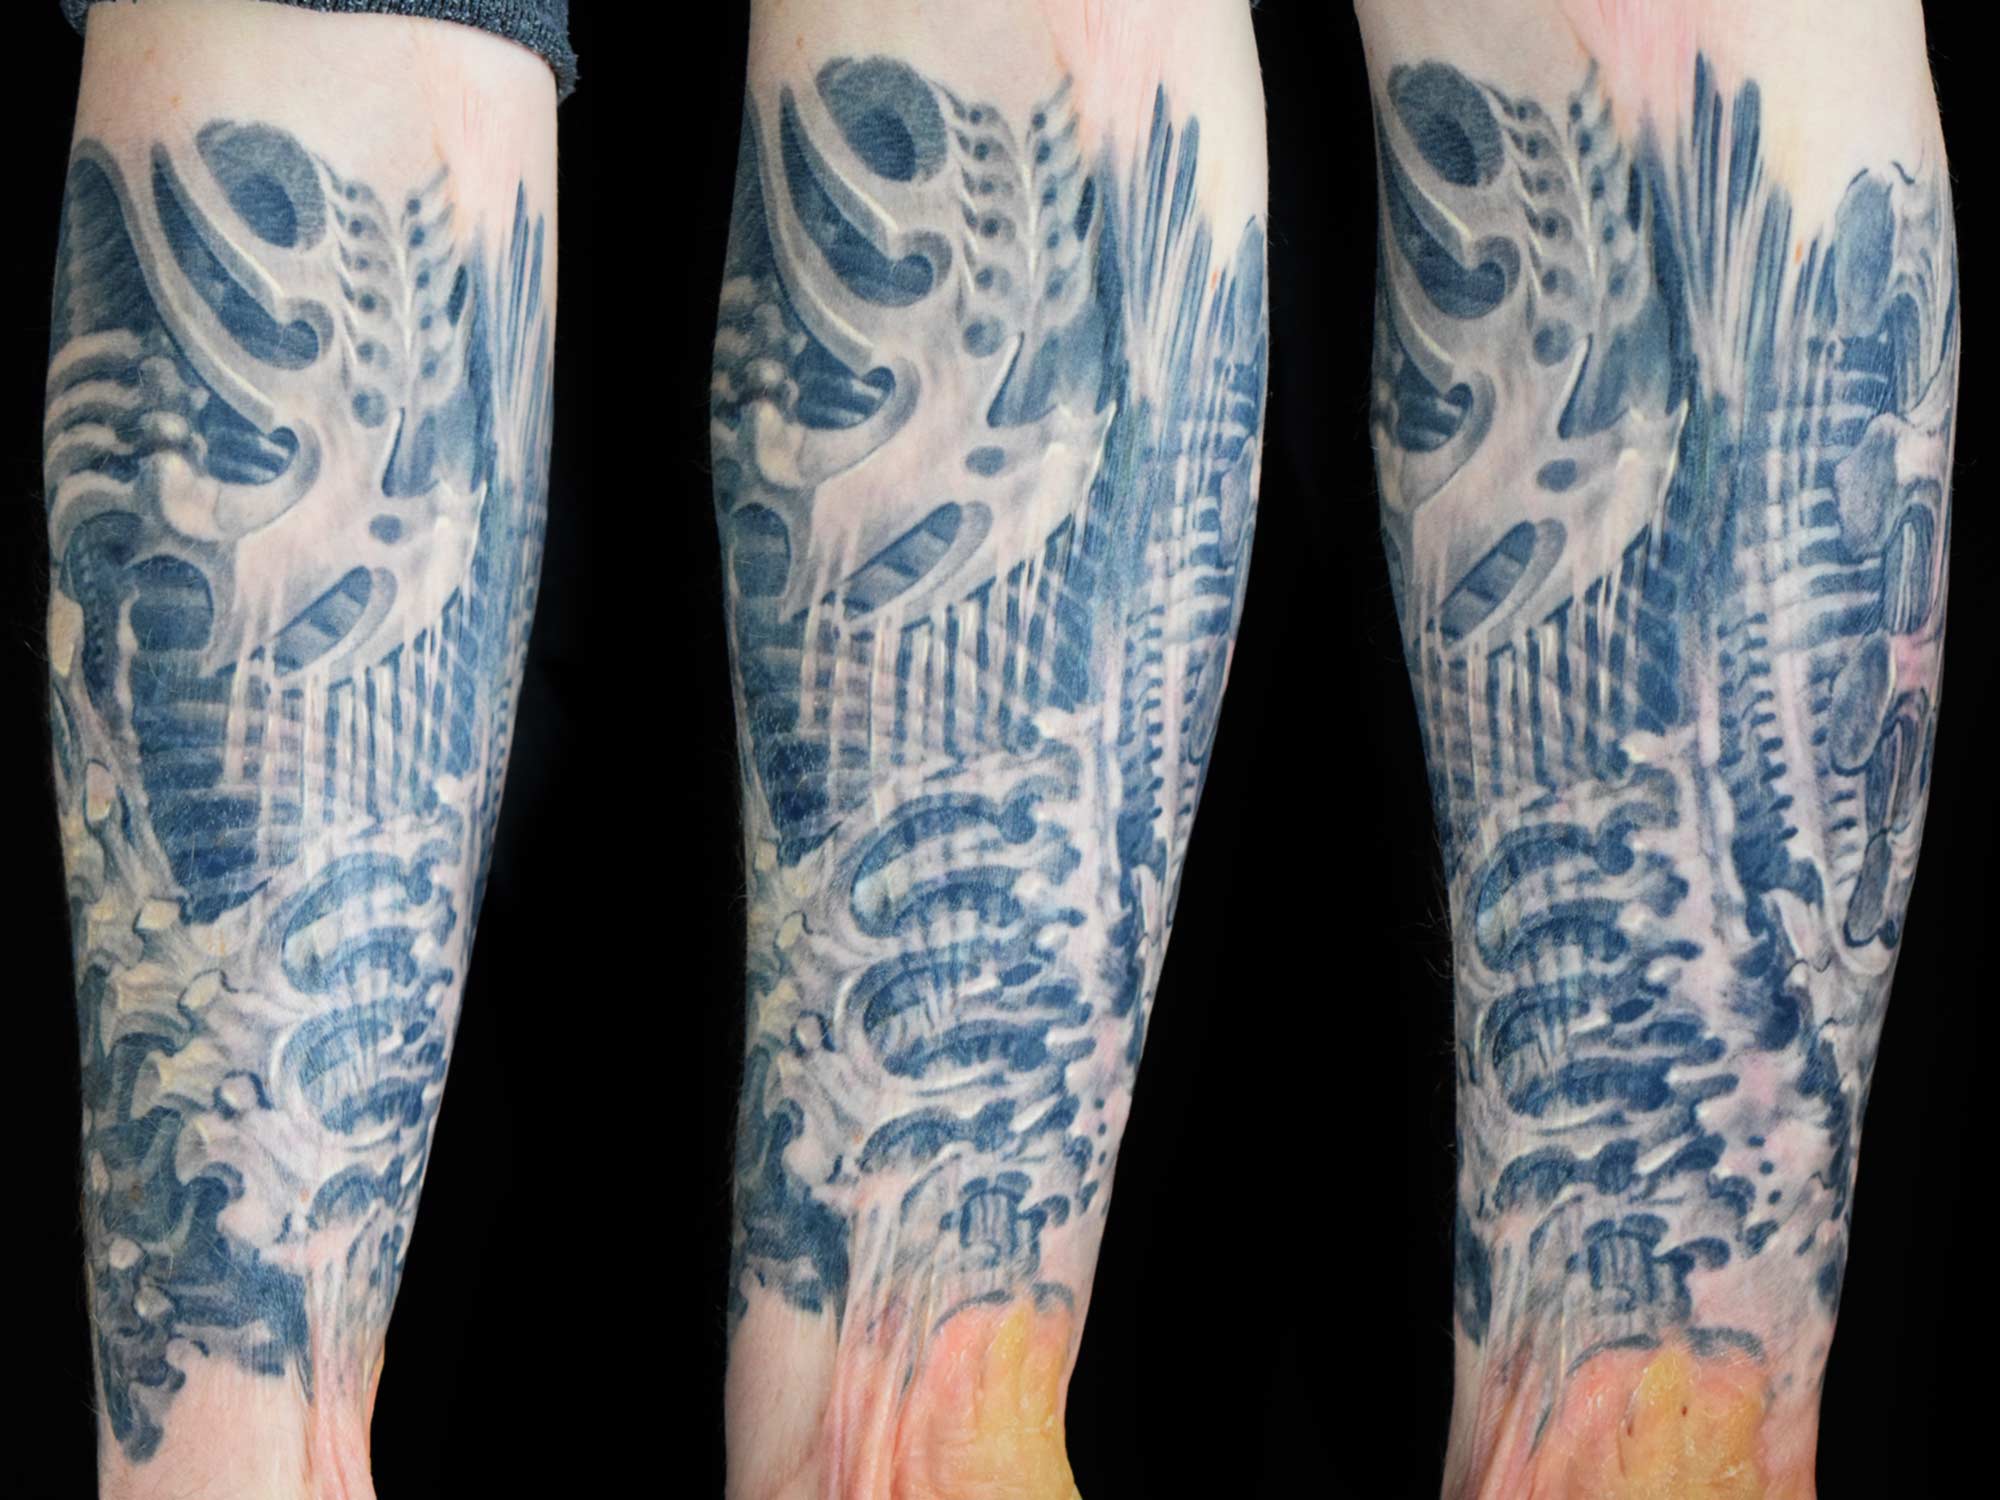 Biomechanik-Alien-Arm-Verbrennung-Narben-Überdeckung-Tattoo-Hits-for-Life-Shit-for-life-Raul-München-2